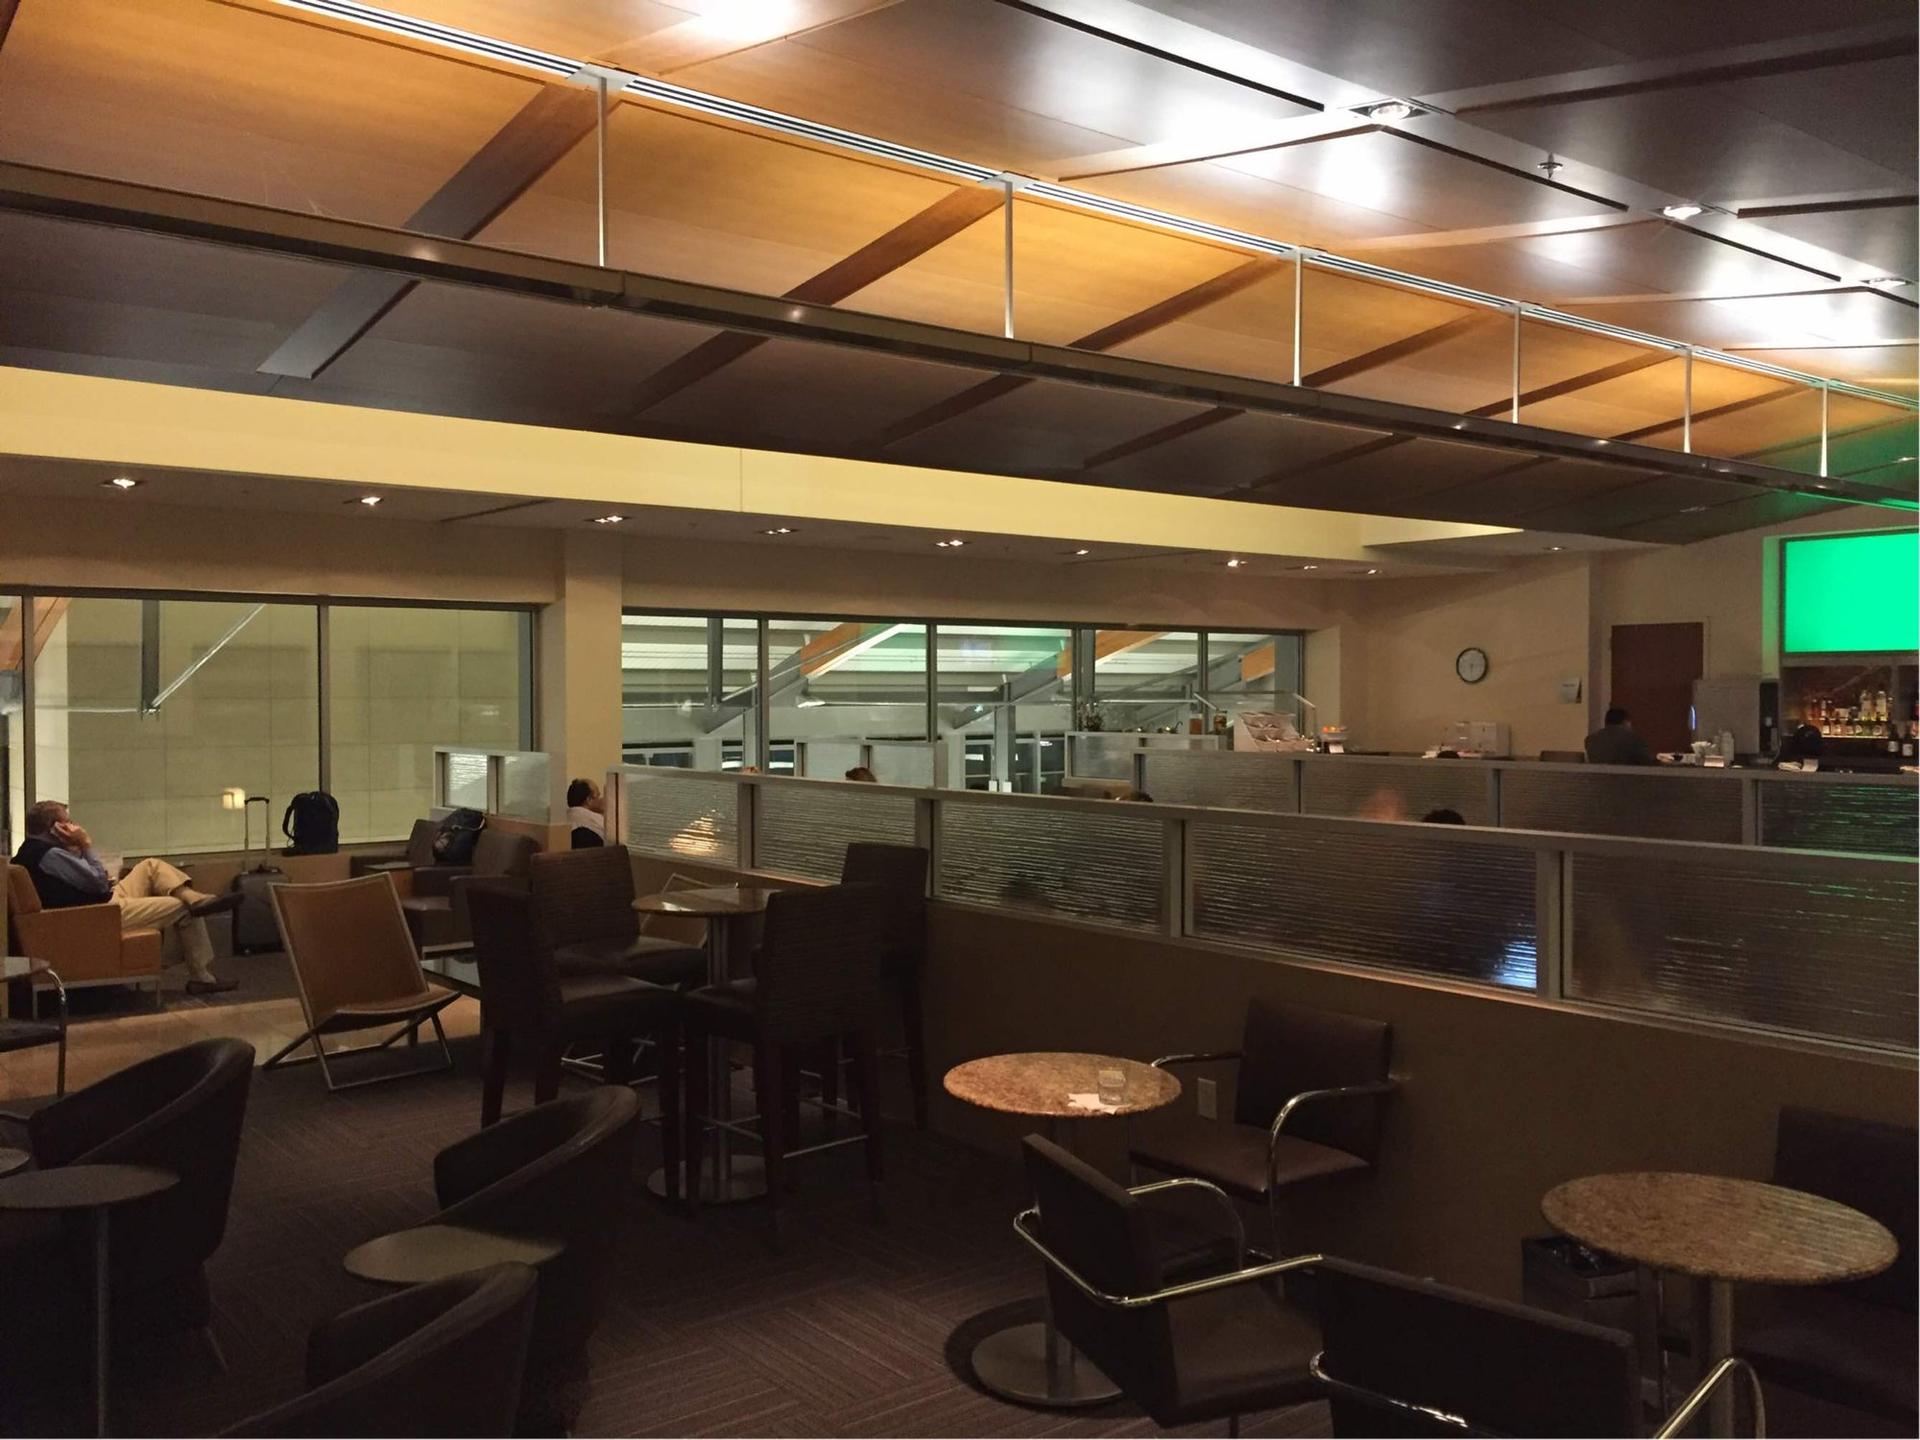 American Airlines Admirals Club image 31 of 31